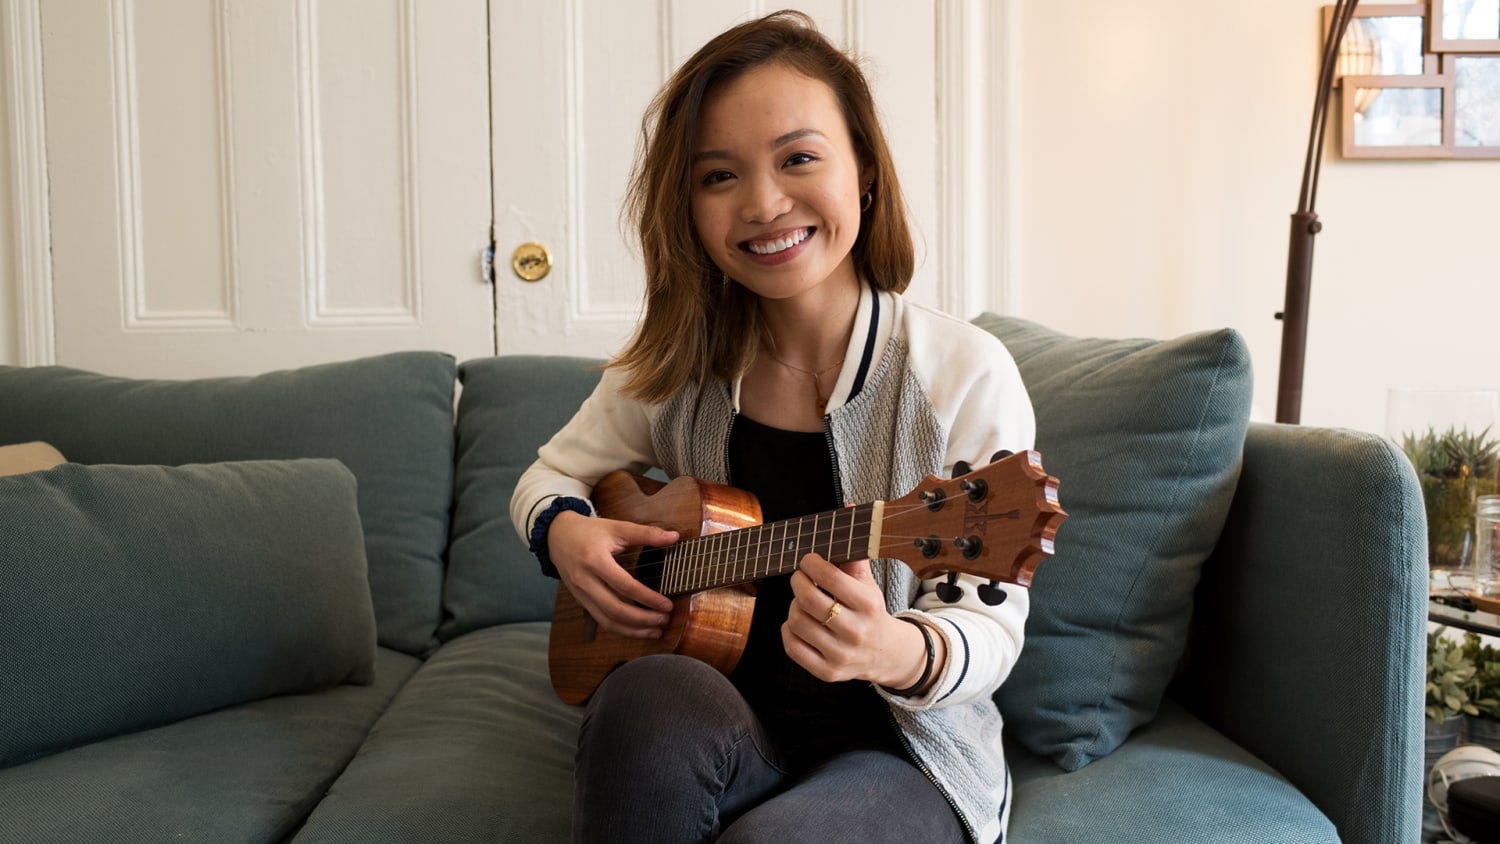 Nix's YouTube channel uuuuuuuukewithme made her a ukulele-playing ...